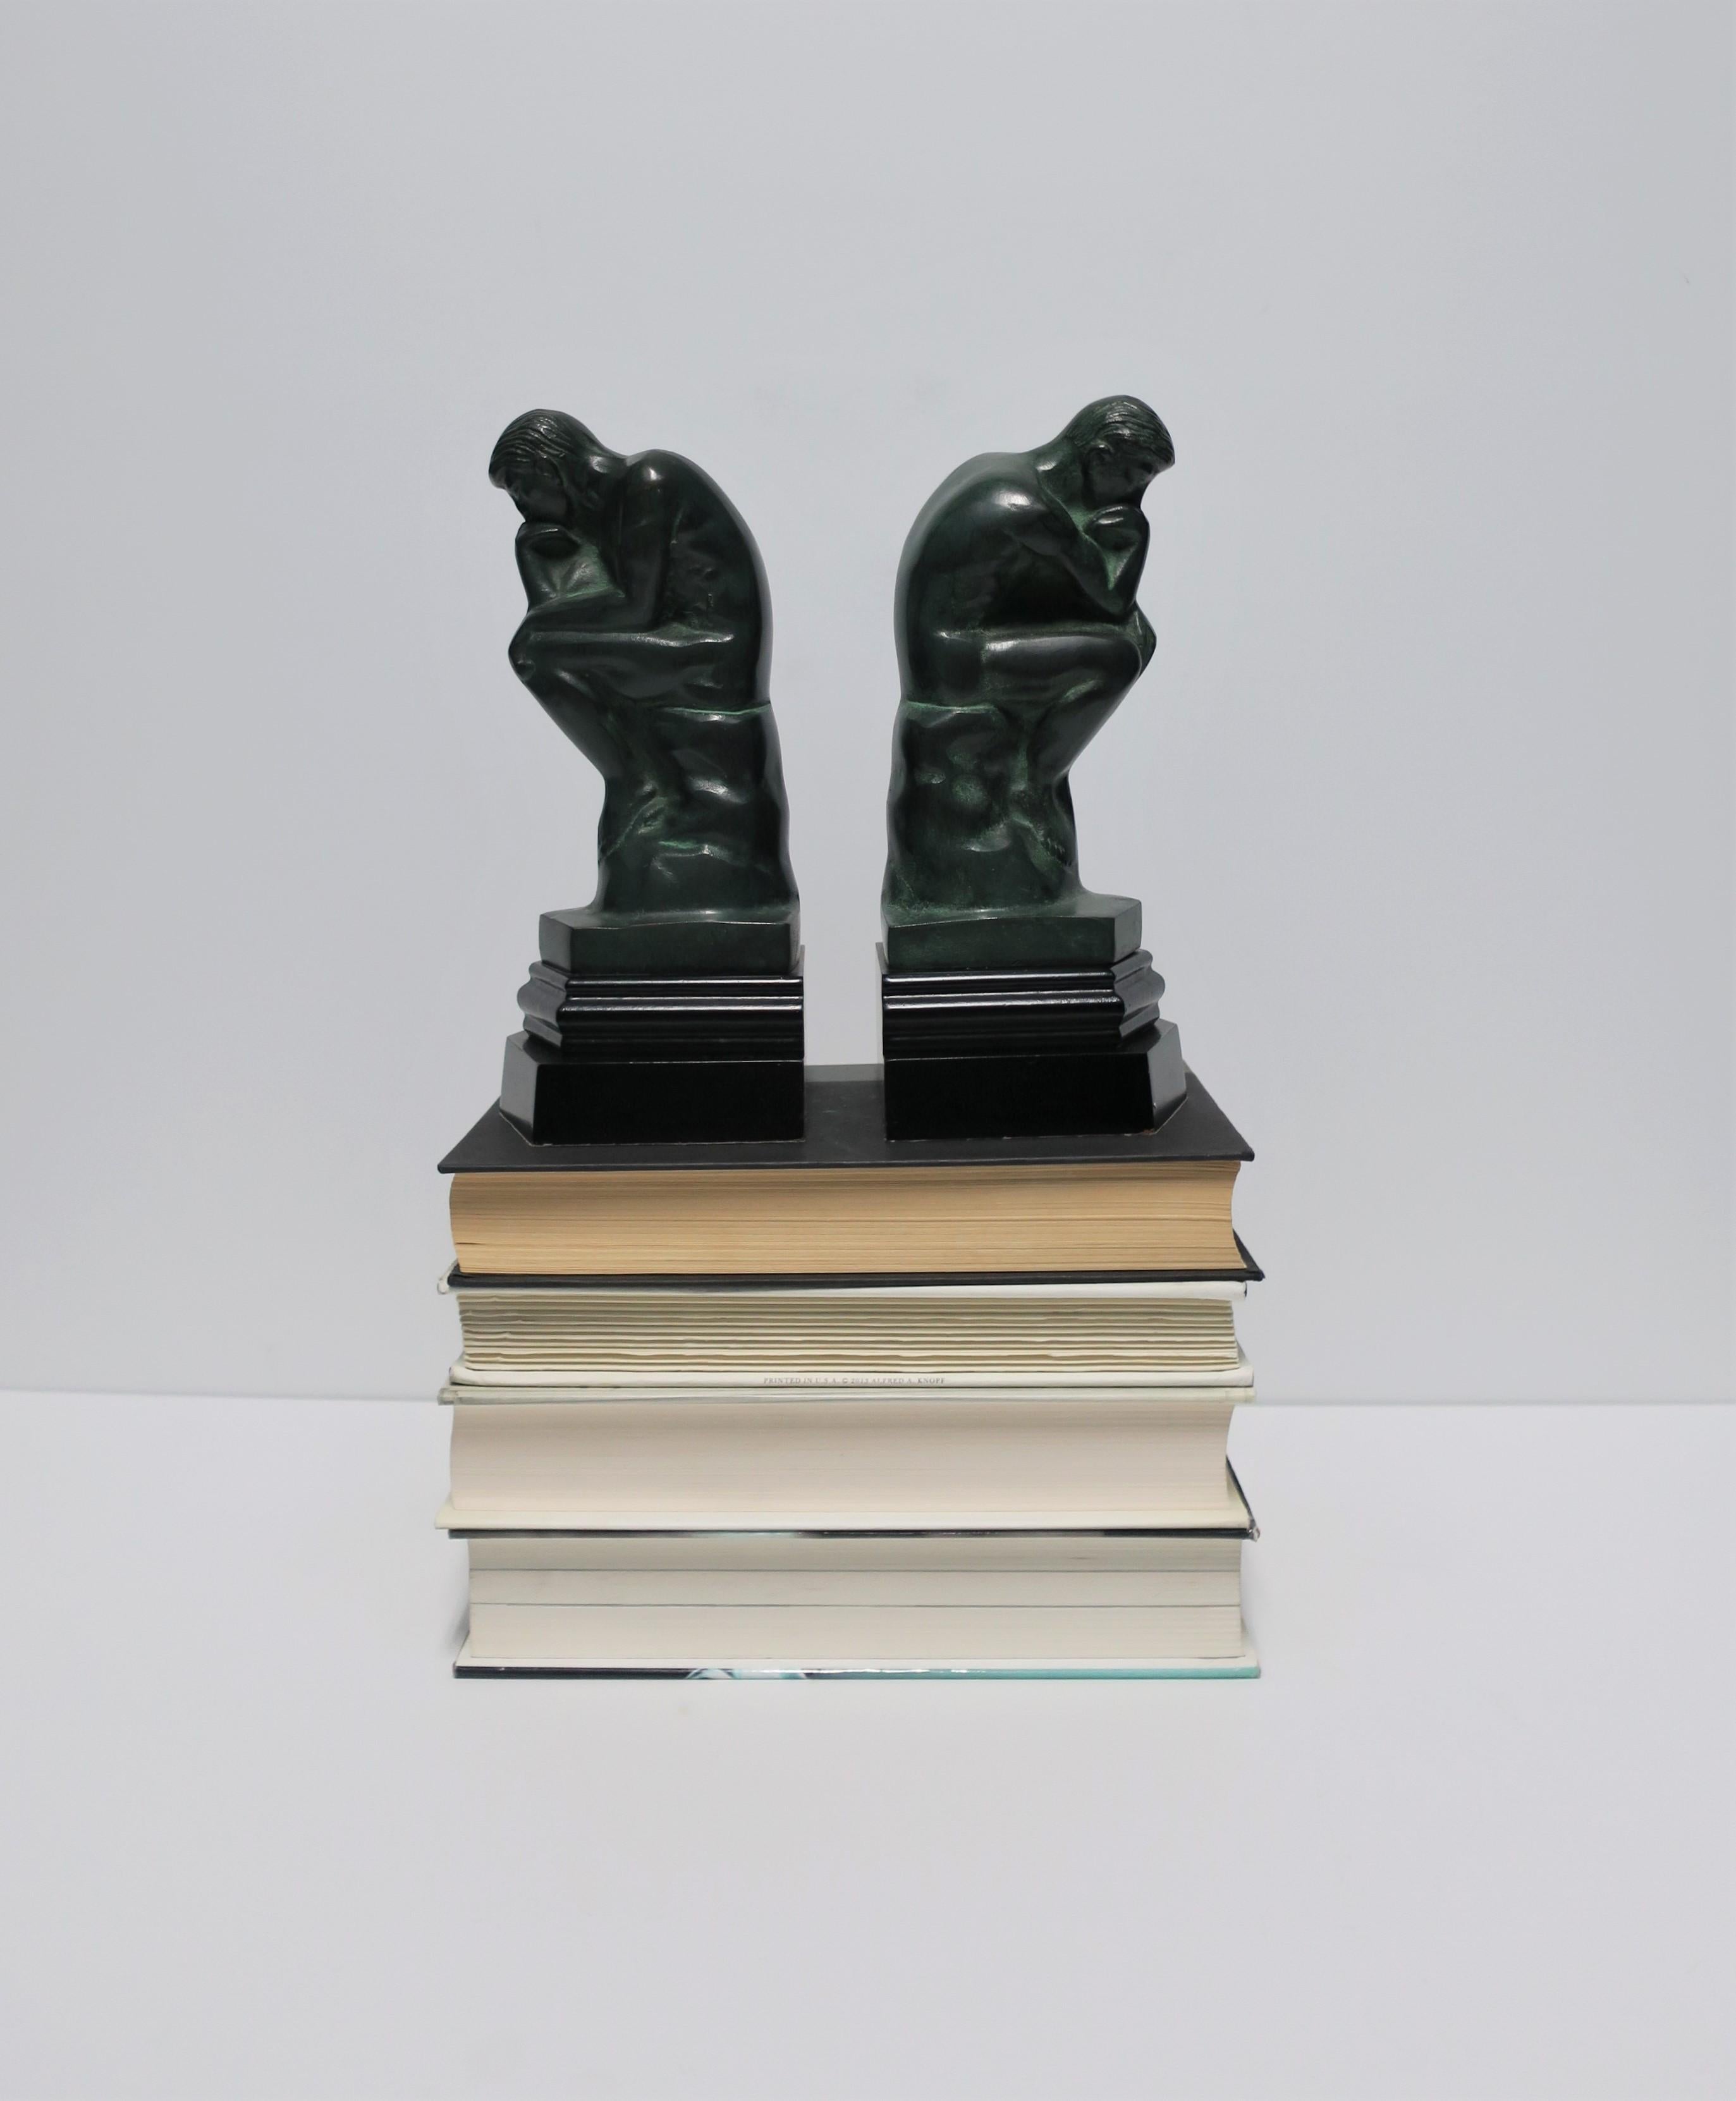 Metal Black and Green Male Sculpture Bookends, Pair